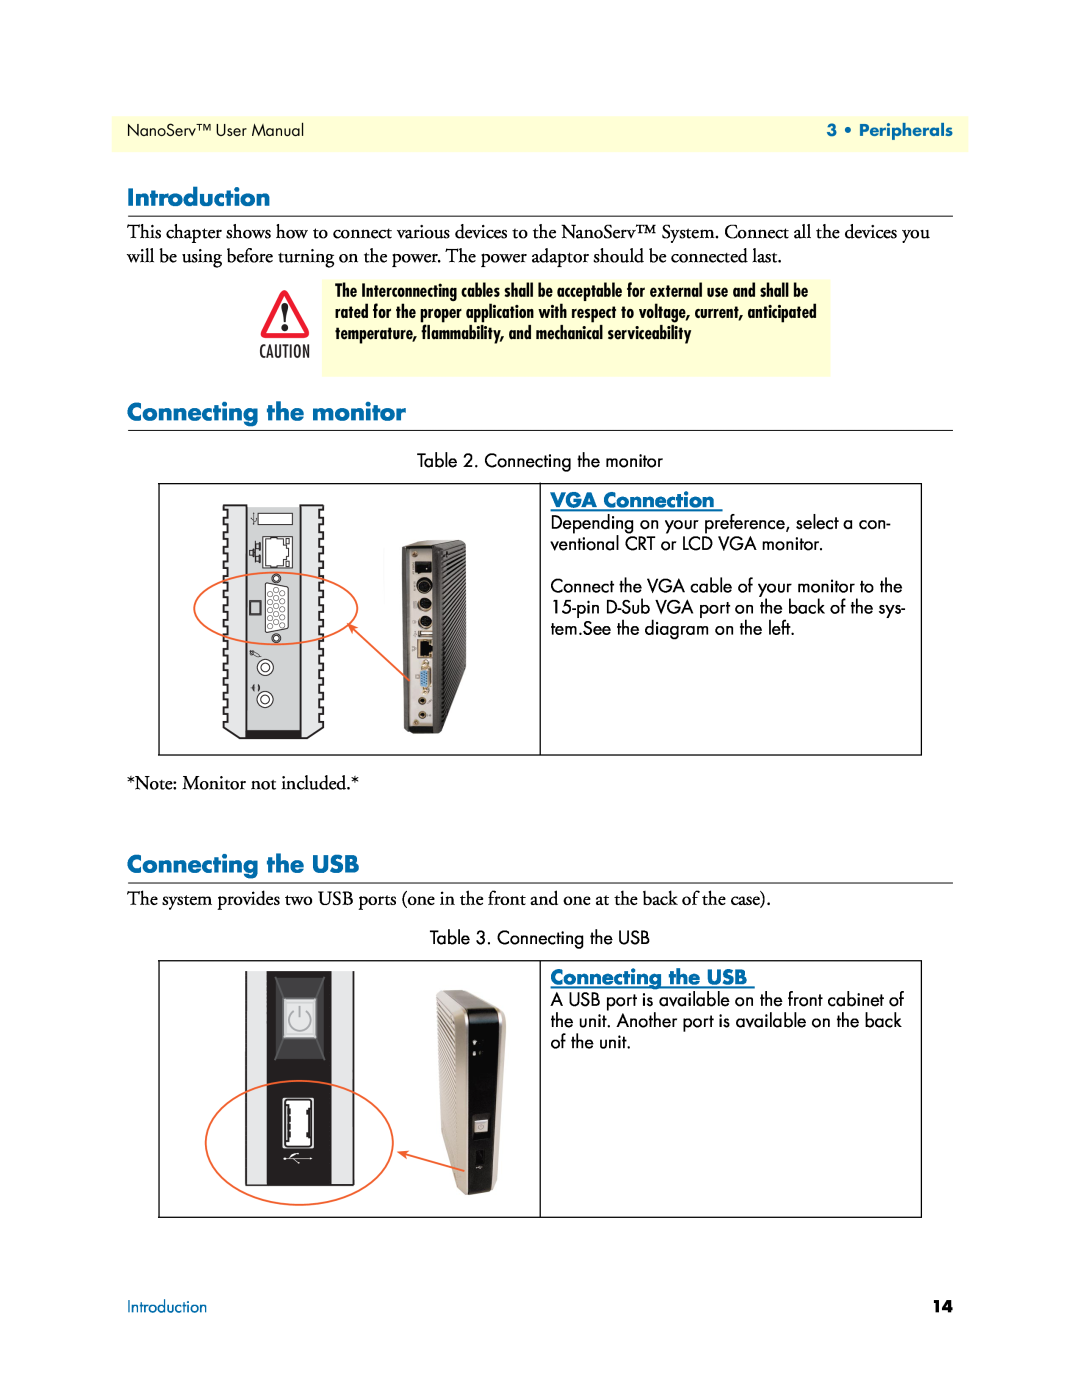 Patton electronic 07M6070-UM user manual Introduction, Connecting the monitor, Connecting the USB, VGA Connection 